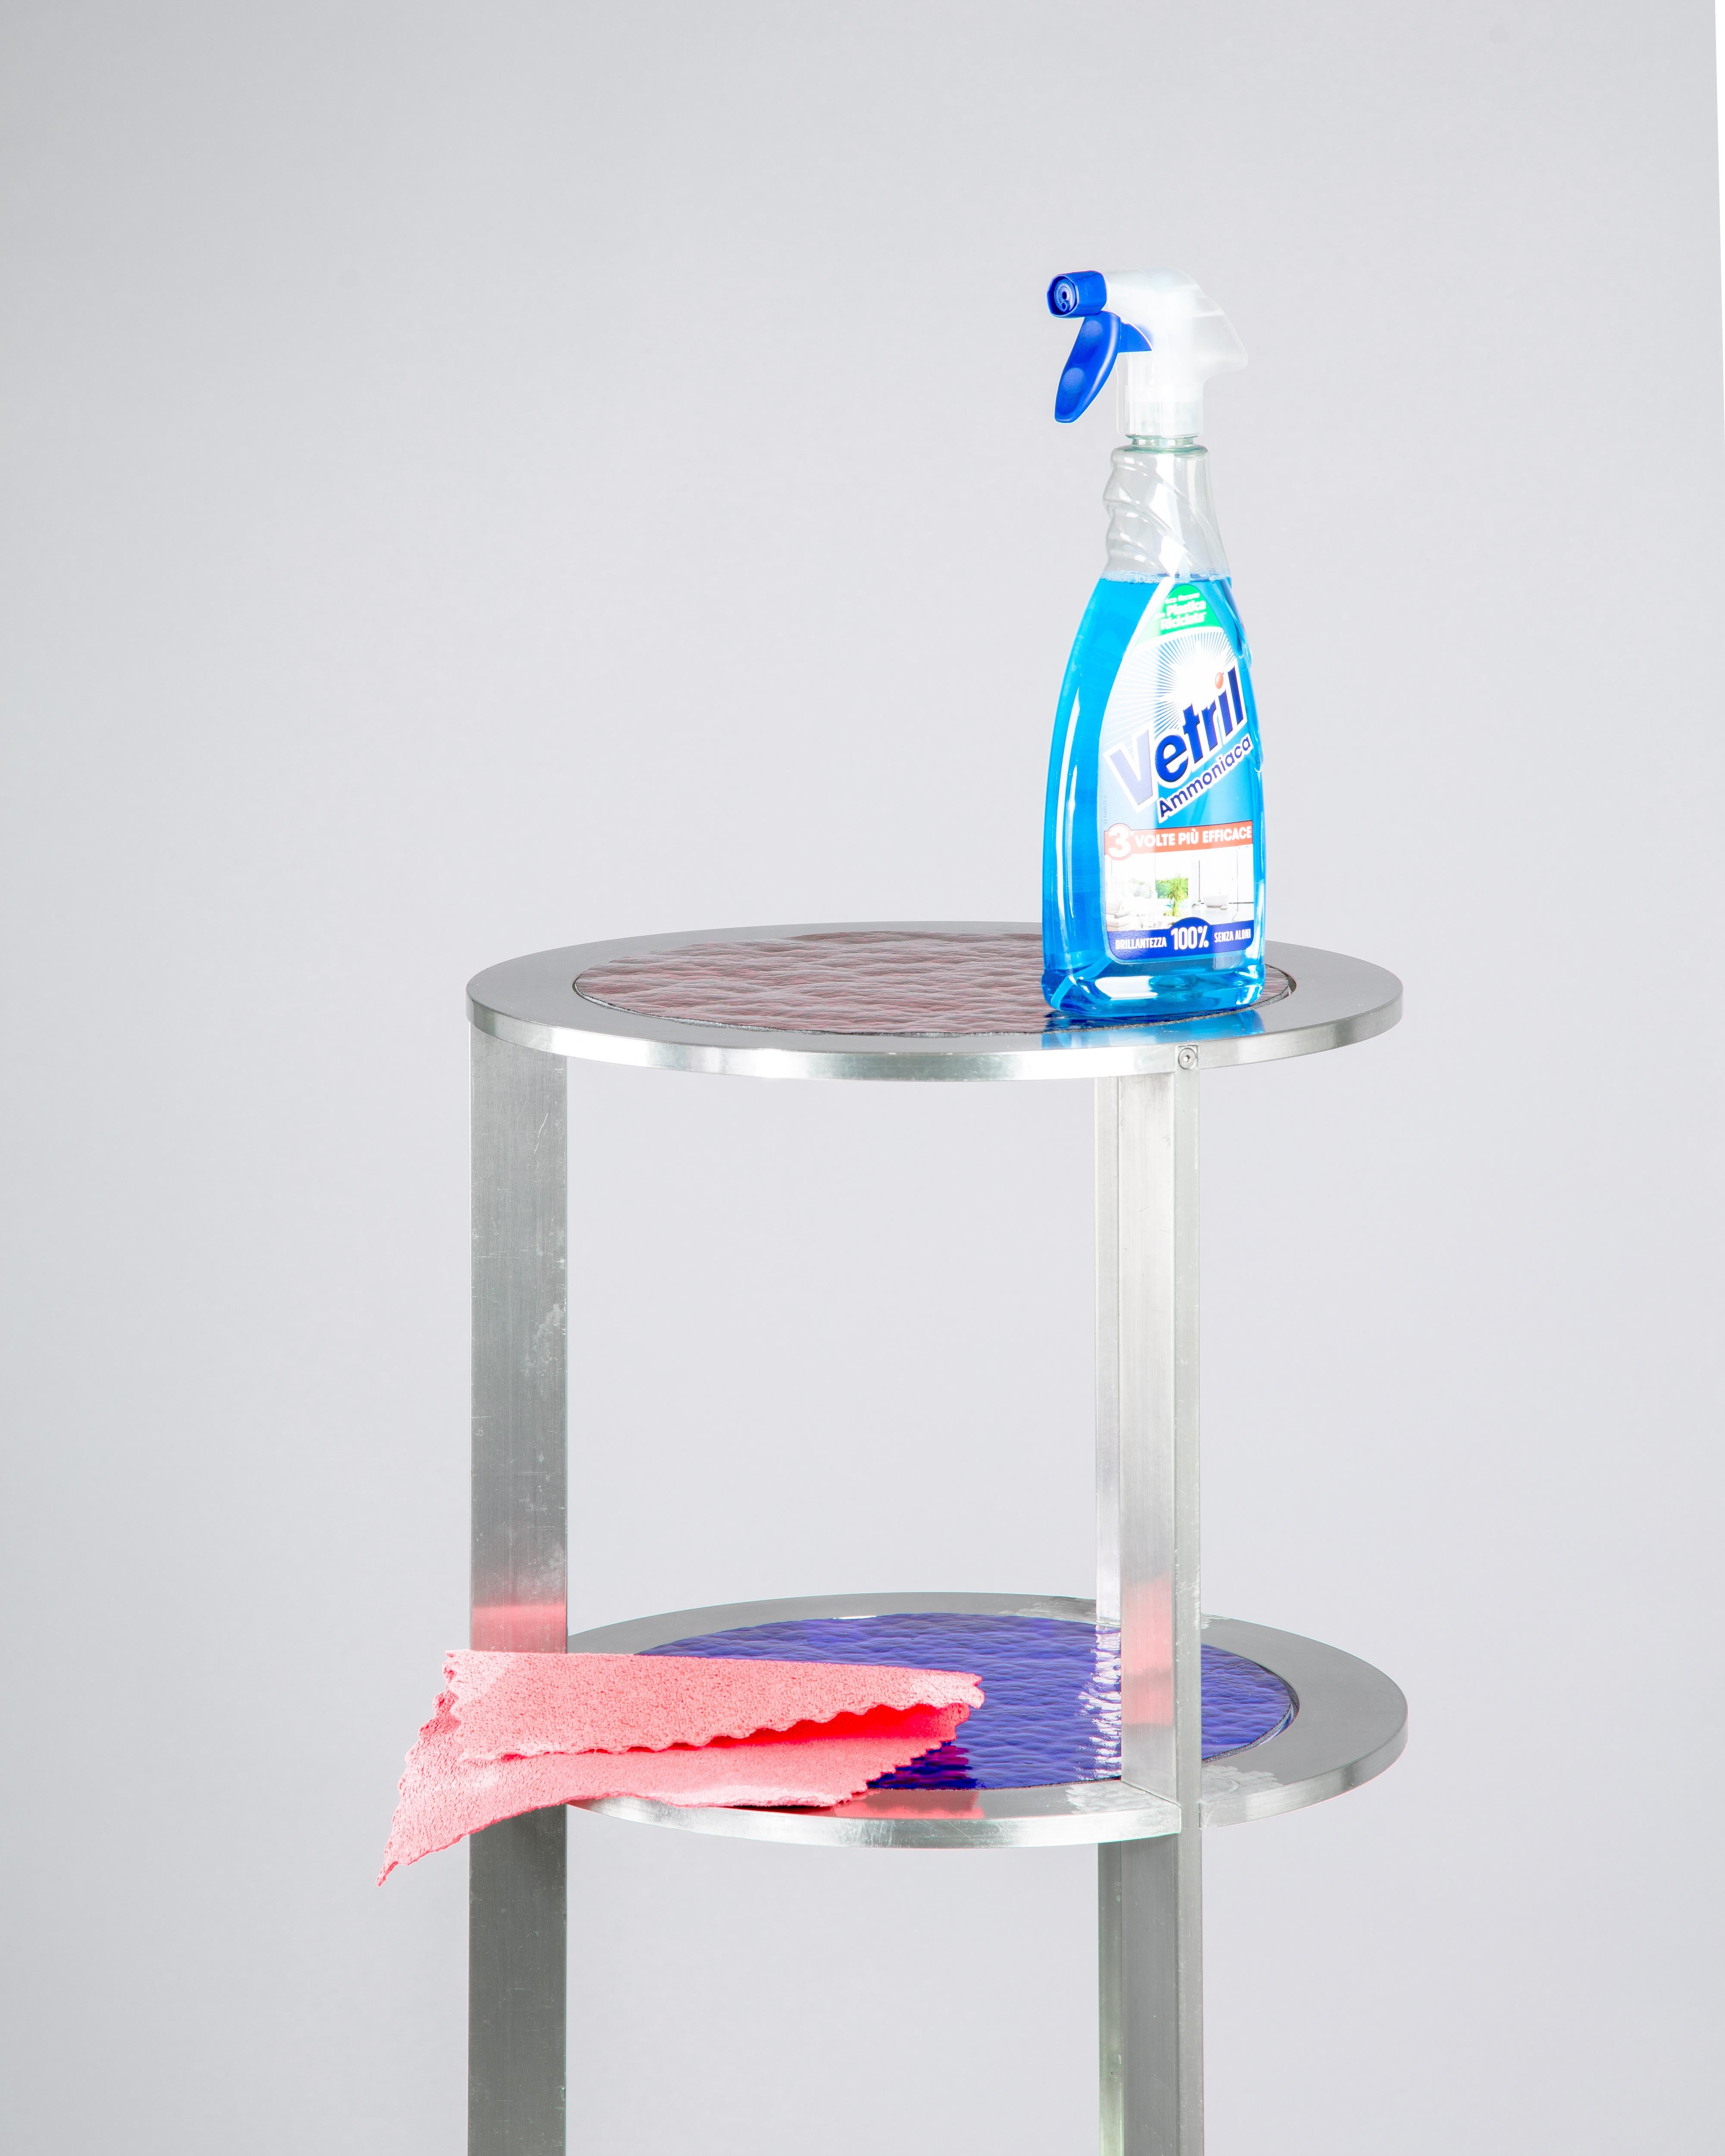 NASA Colonna shelf by Daniel Nikolovski
Dimensions: ø39 x H 120 cm
Materials: Aluminum, Colored Glass

NASA Colonna is a circular shelf that is composed from four aluminium rings containing multi-coloured cathedral glass. This flat-packed